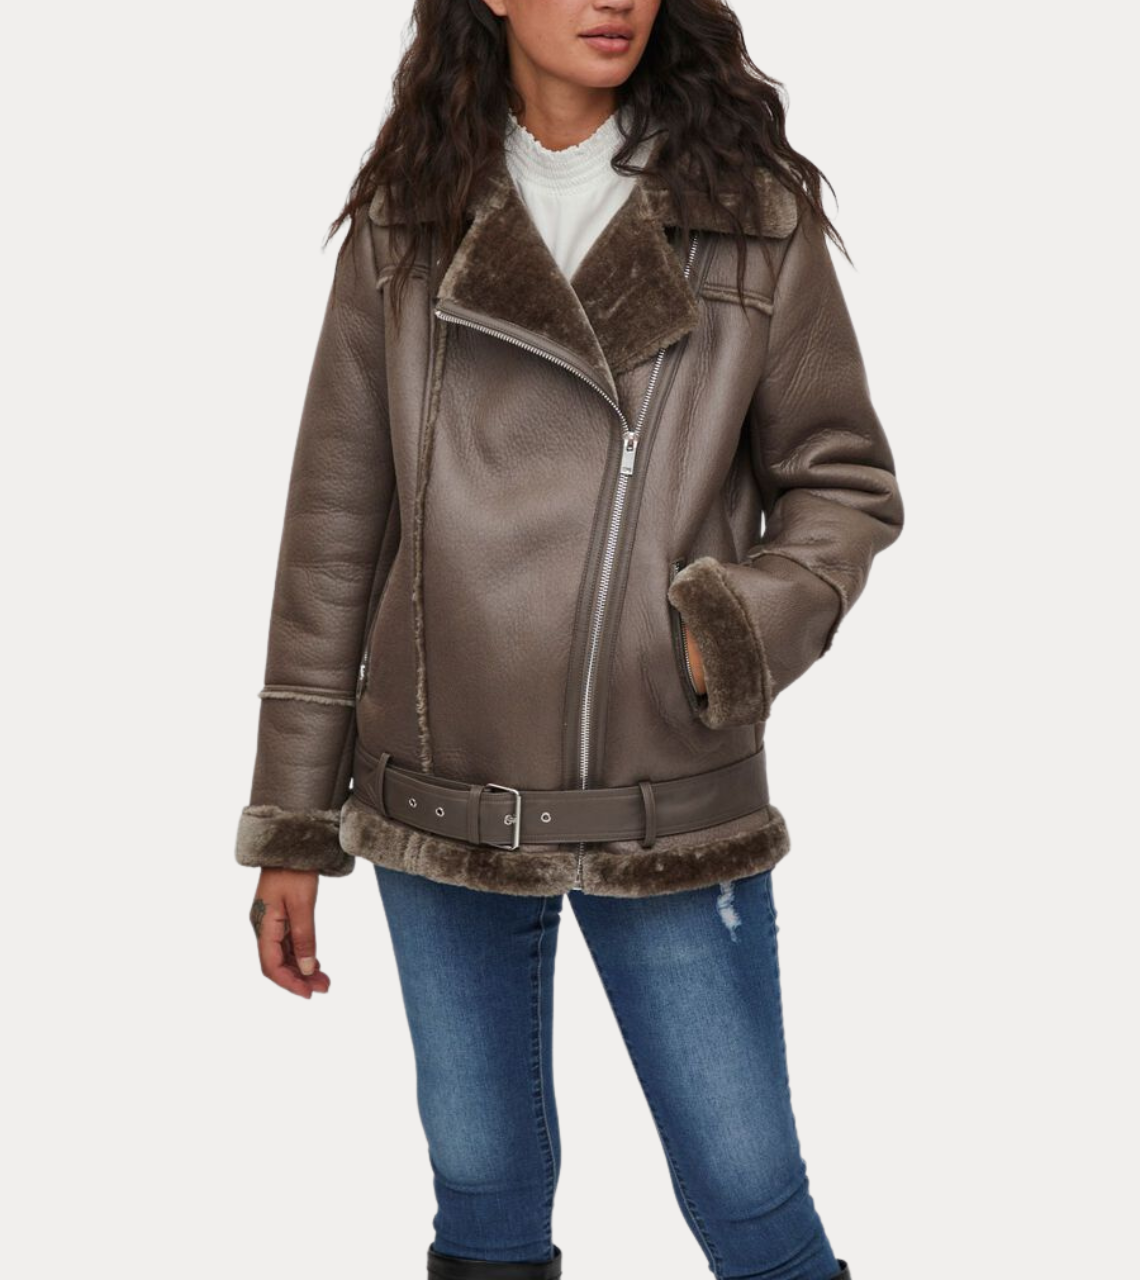 Ancient Brown Shearling Leather Jacket